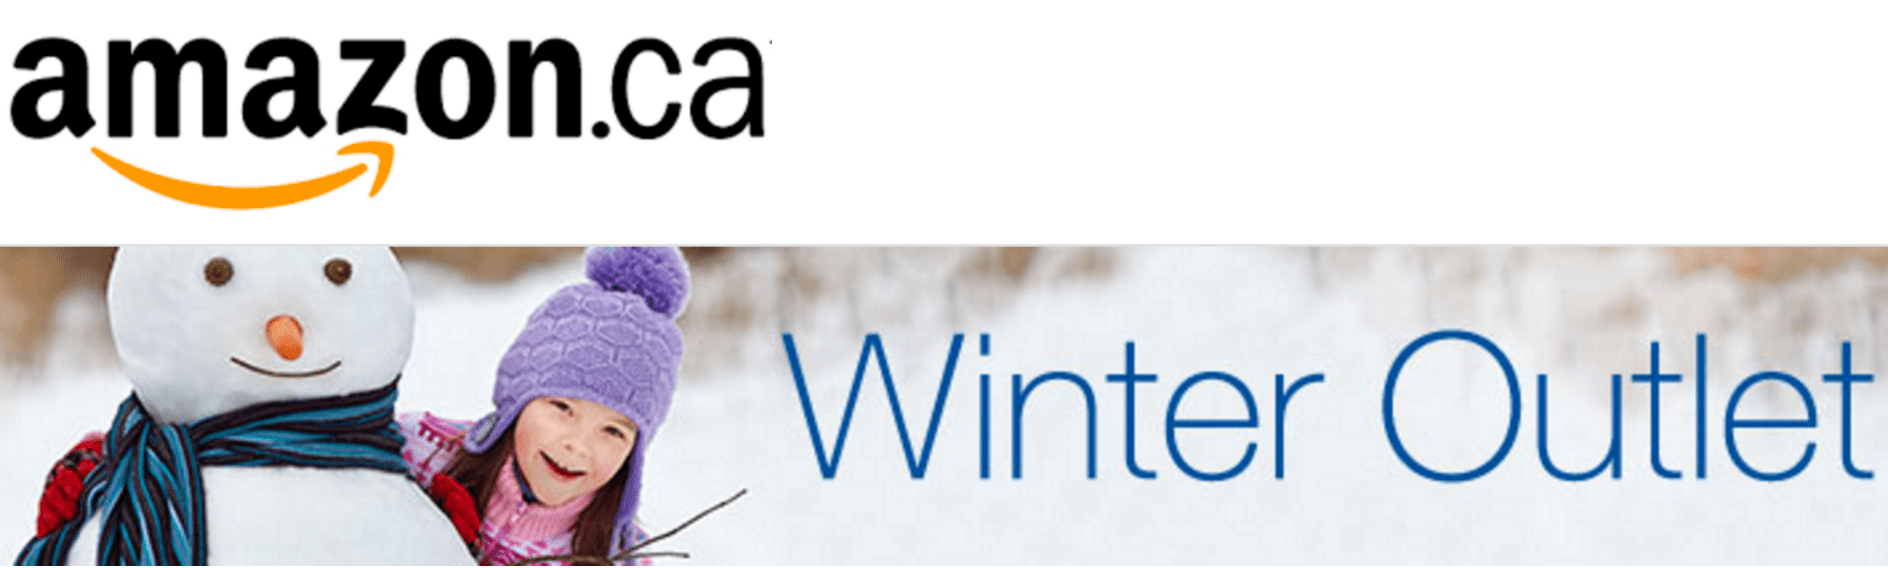 Amazon Canada Winter Outlet Offers: Save Up To 90% Off Watches, Sport & Outdoor, Tools, Movies ...